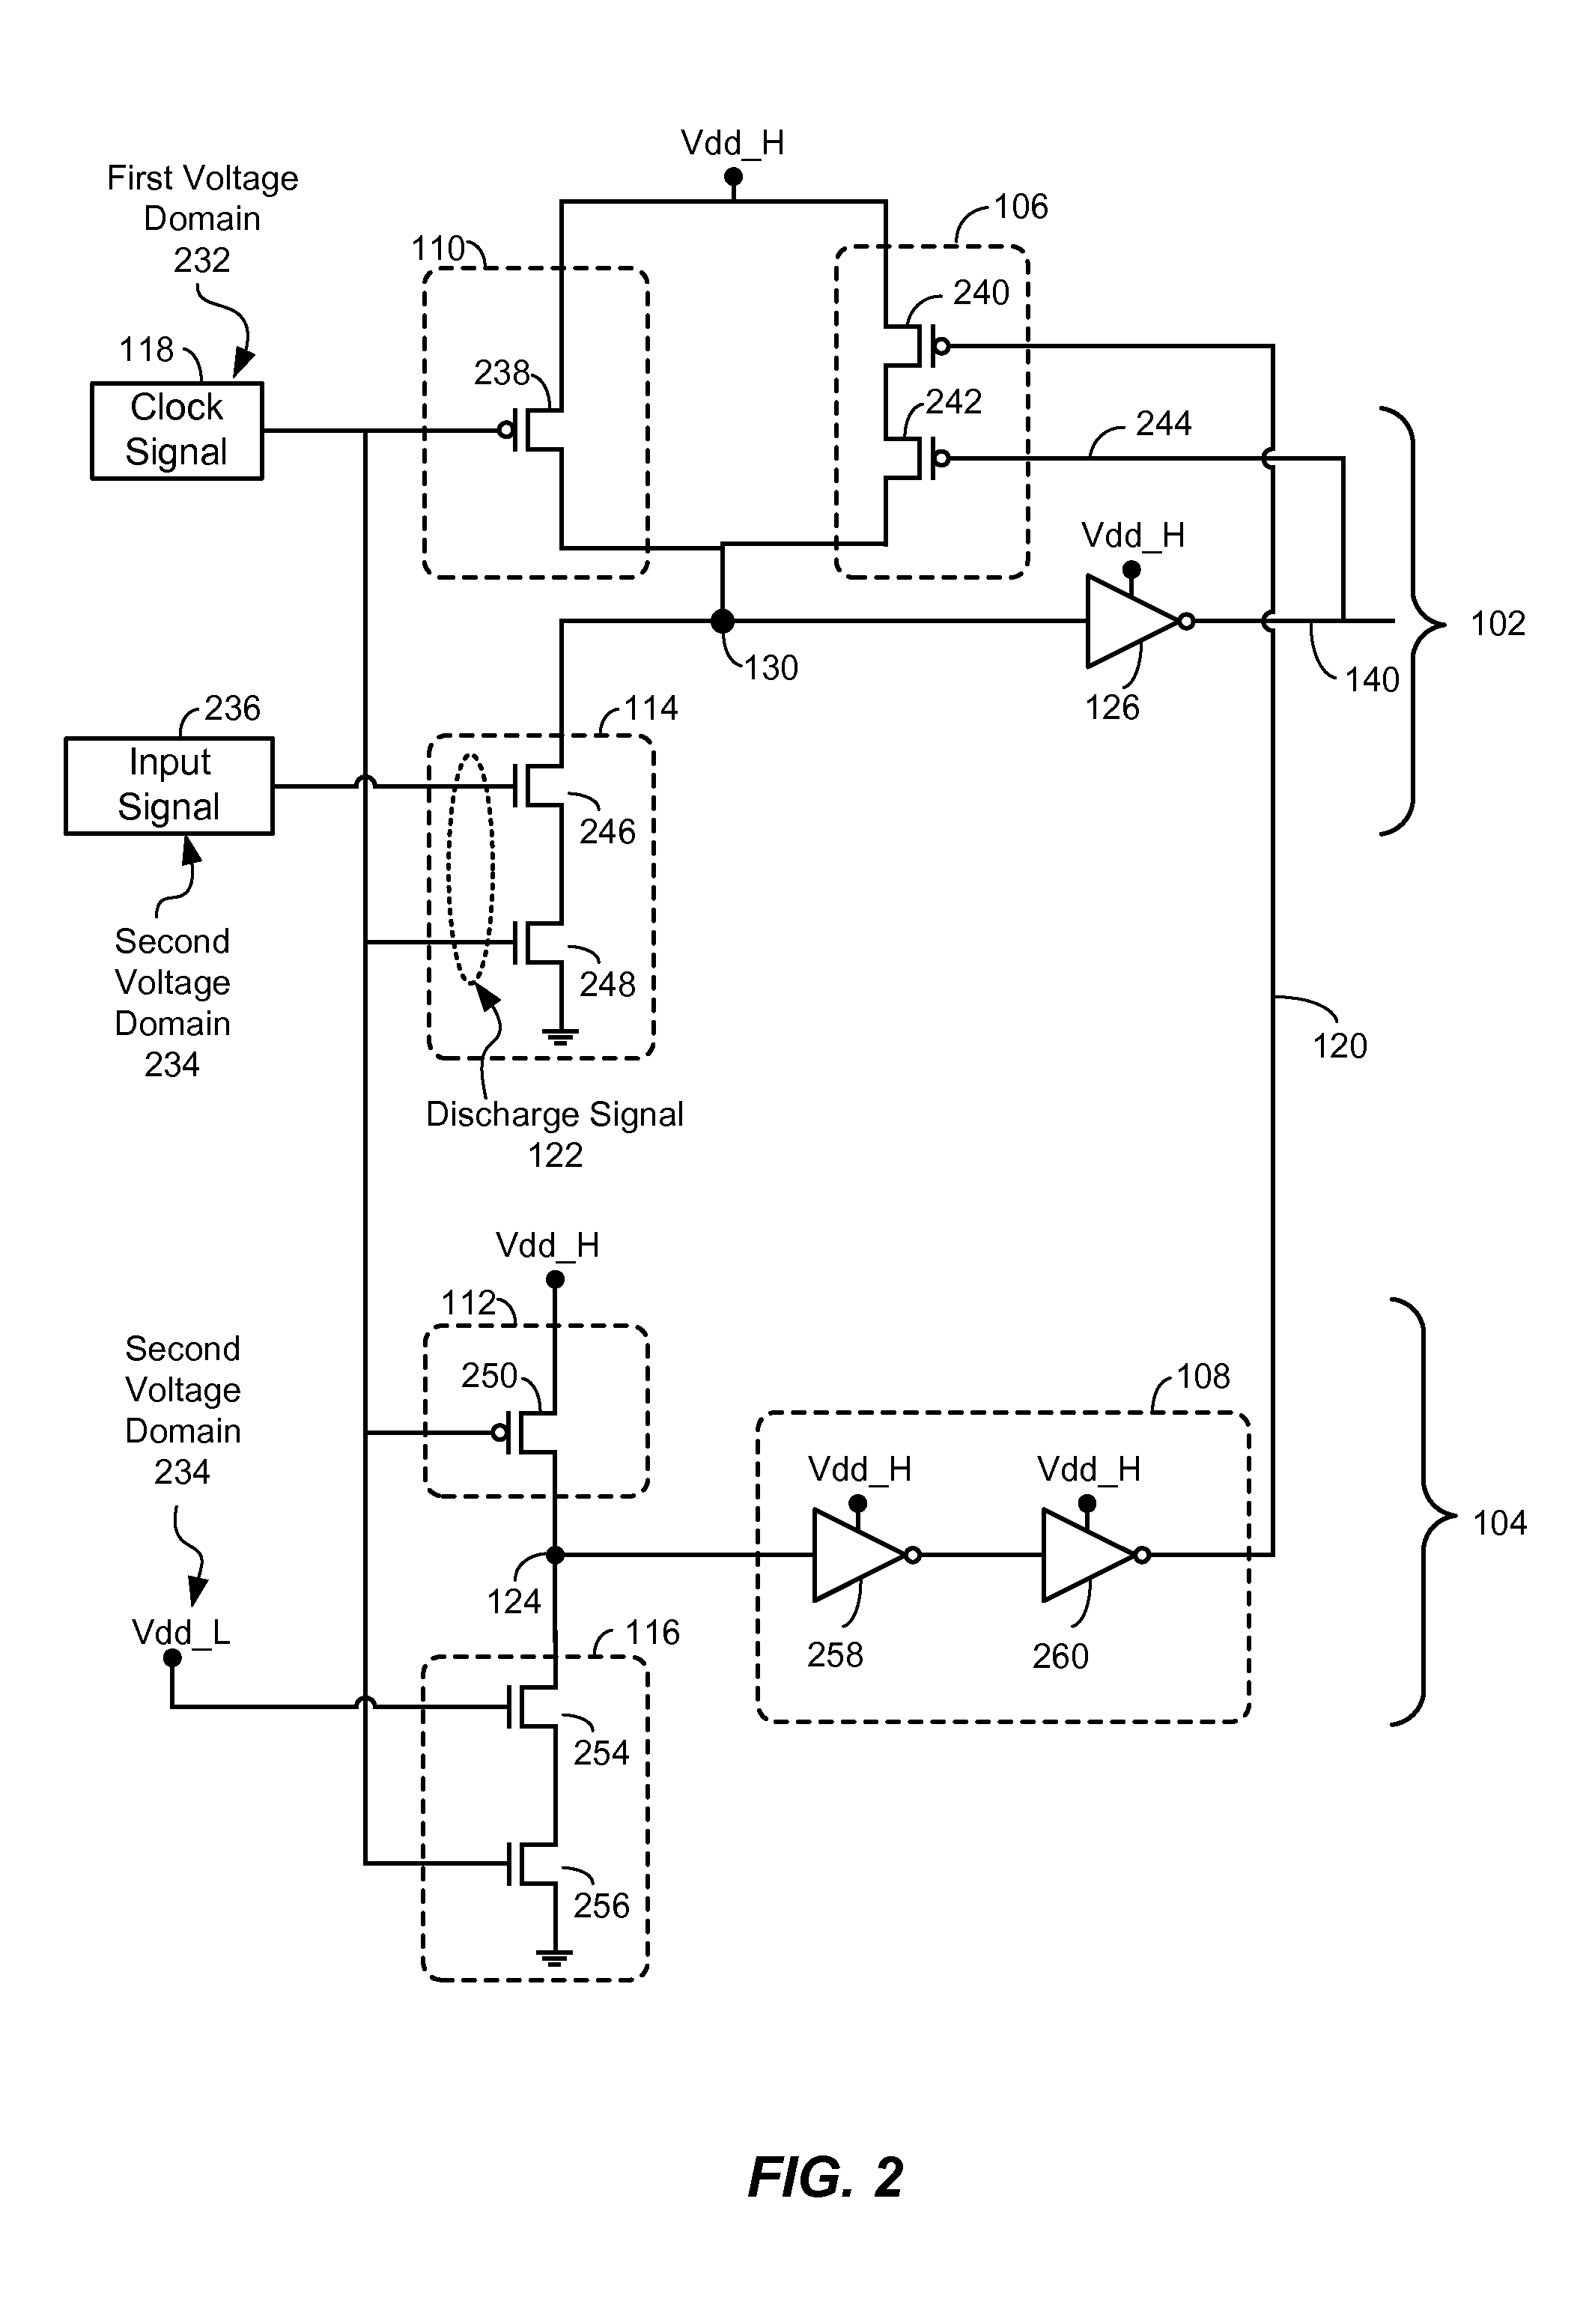 Voltage level shifter with dynamic circuit structure having discharge delay tracking